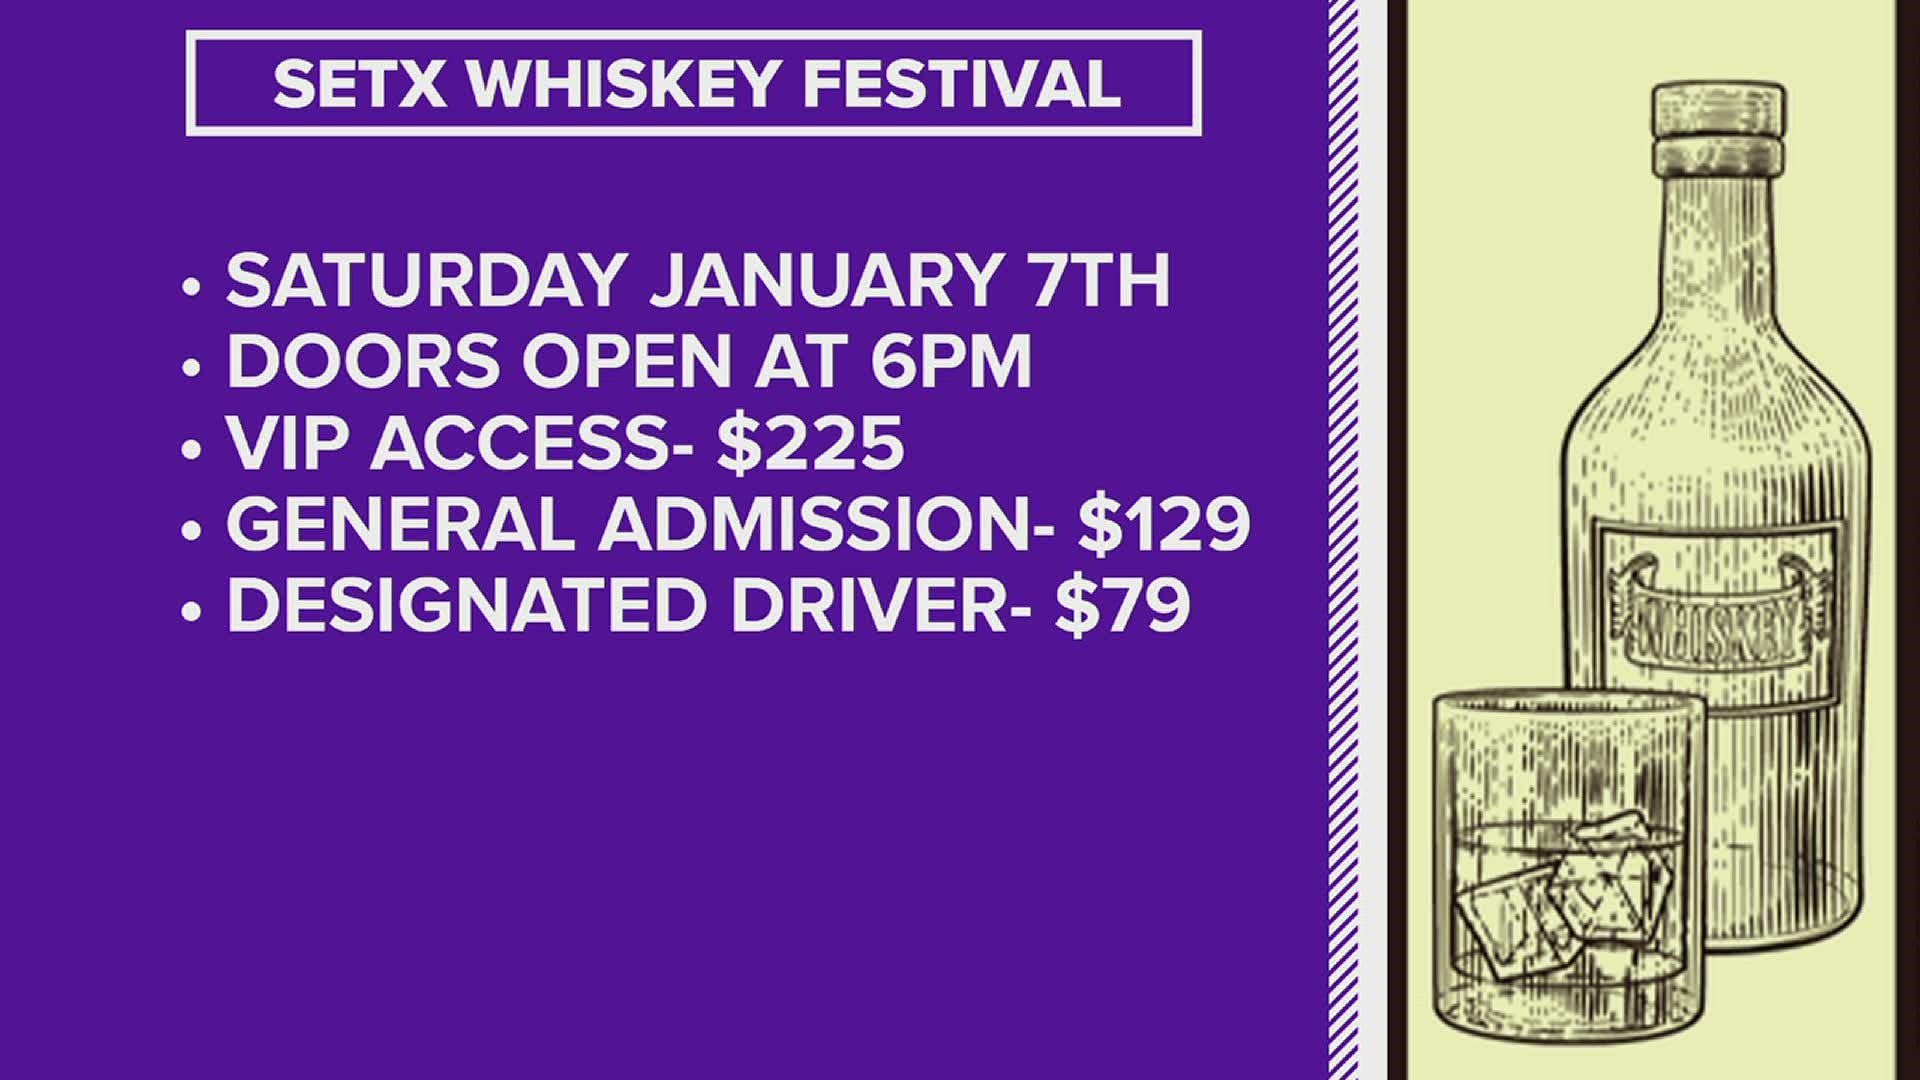 Organizers describe the two-day celebration as, “a whiskey and bourbon event unlike any other Texas has seen before.”